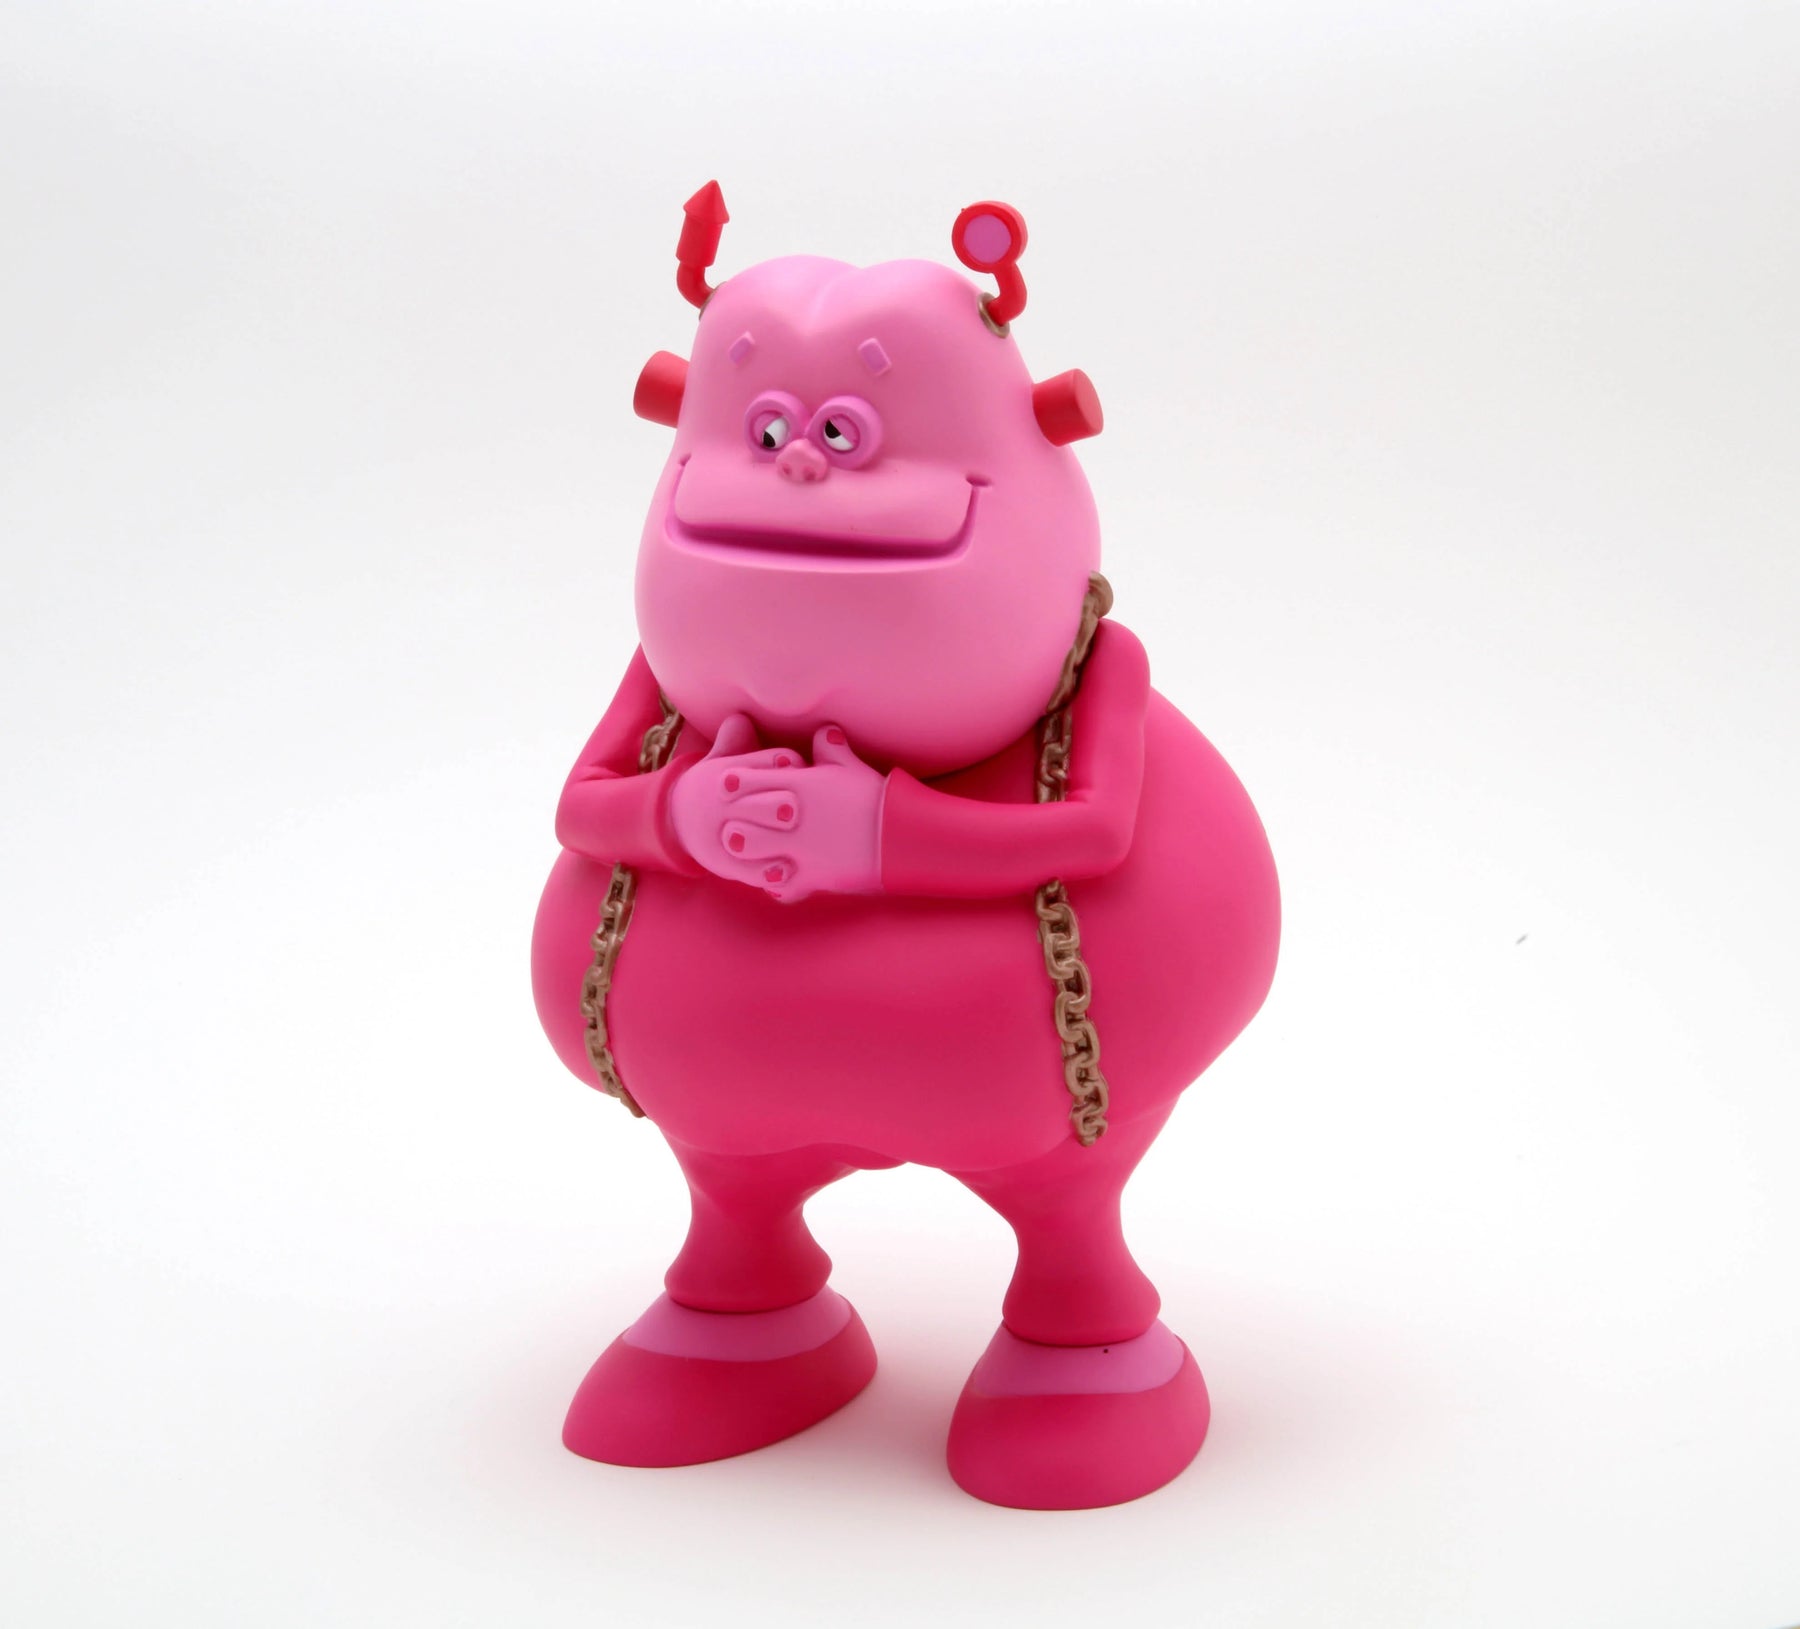 Franken Fat 8-inch vinyl figure by Ron English Available Now